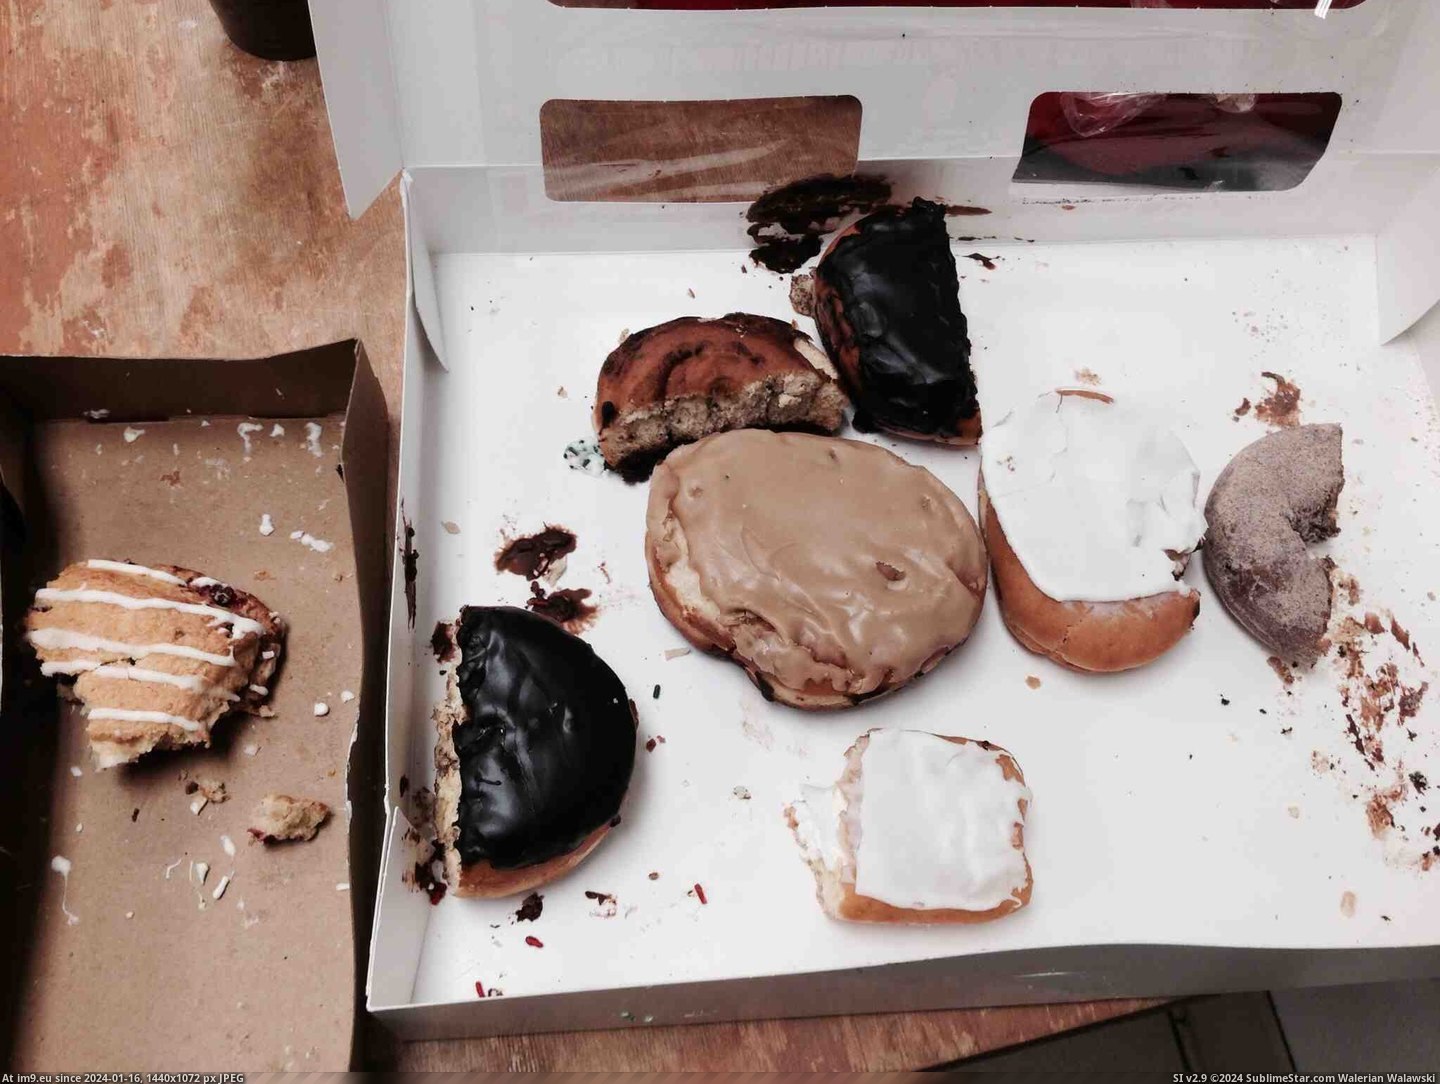 #You #Work #Females #Donuts #Brings [Pics] This is what happens when someone brings in donuts and you work with many females. Pic. (Изображение из альбом My r/PICS favs))